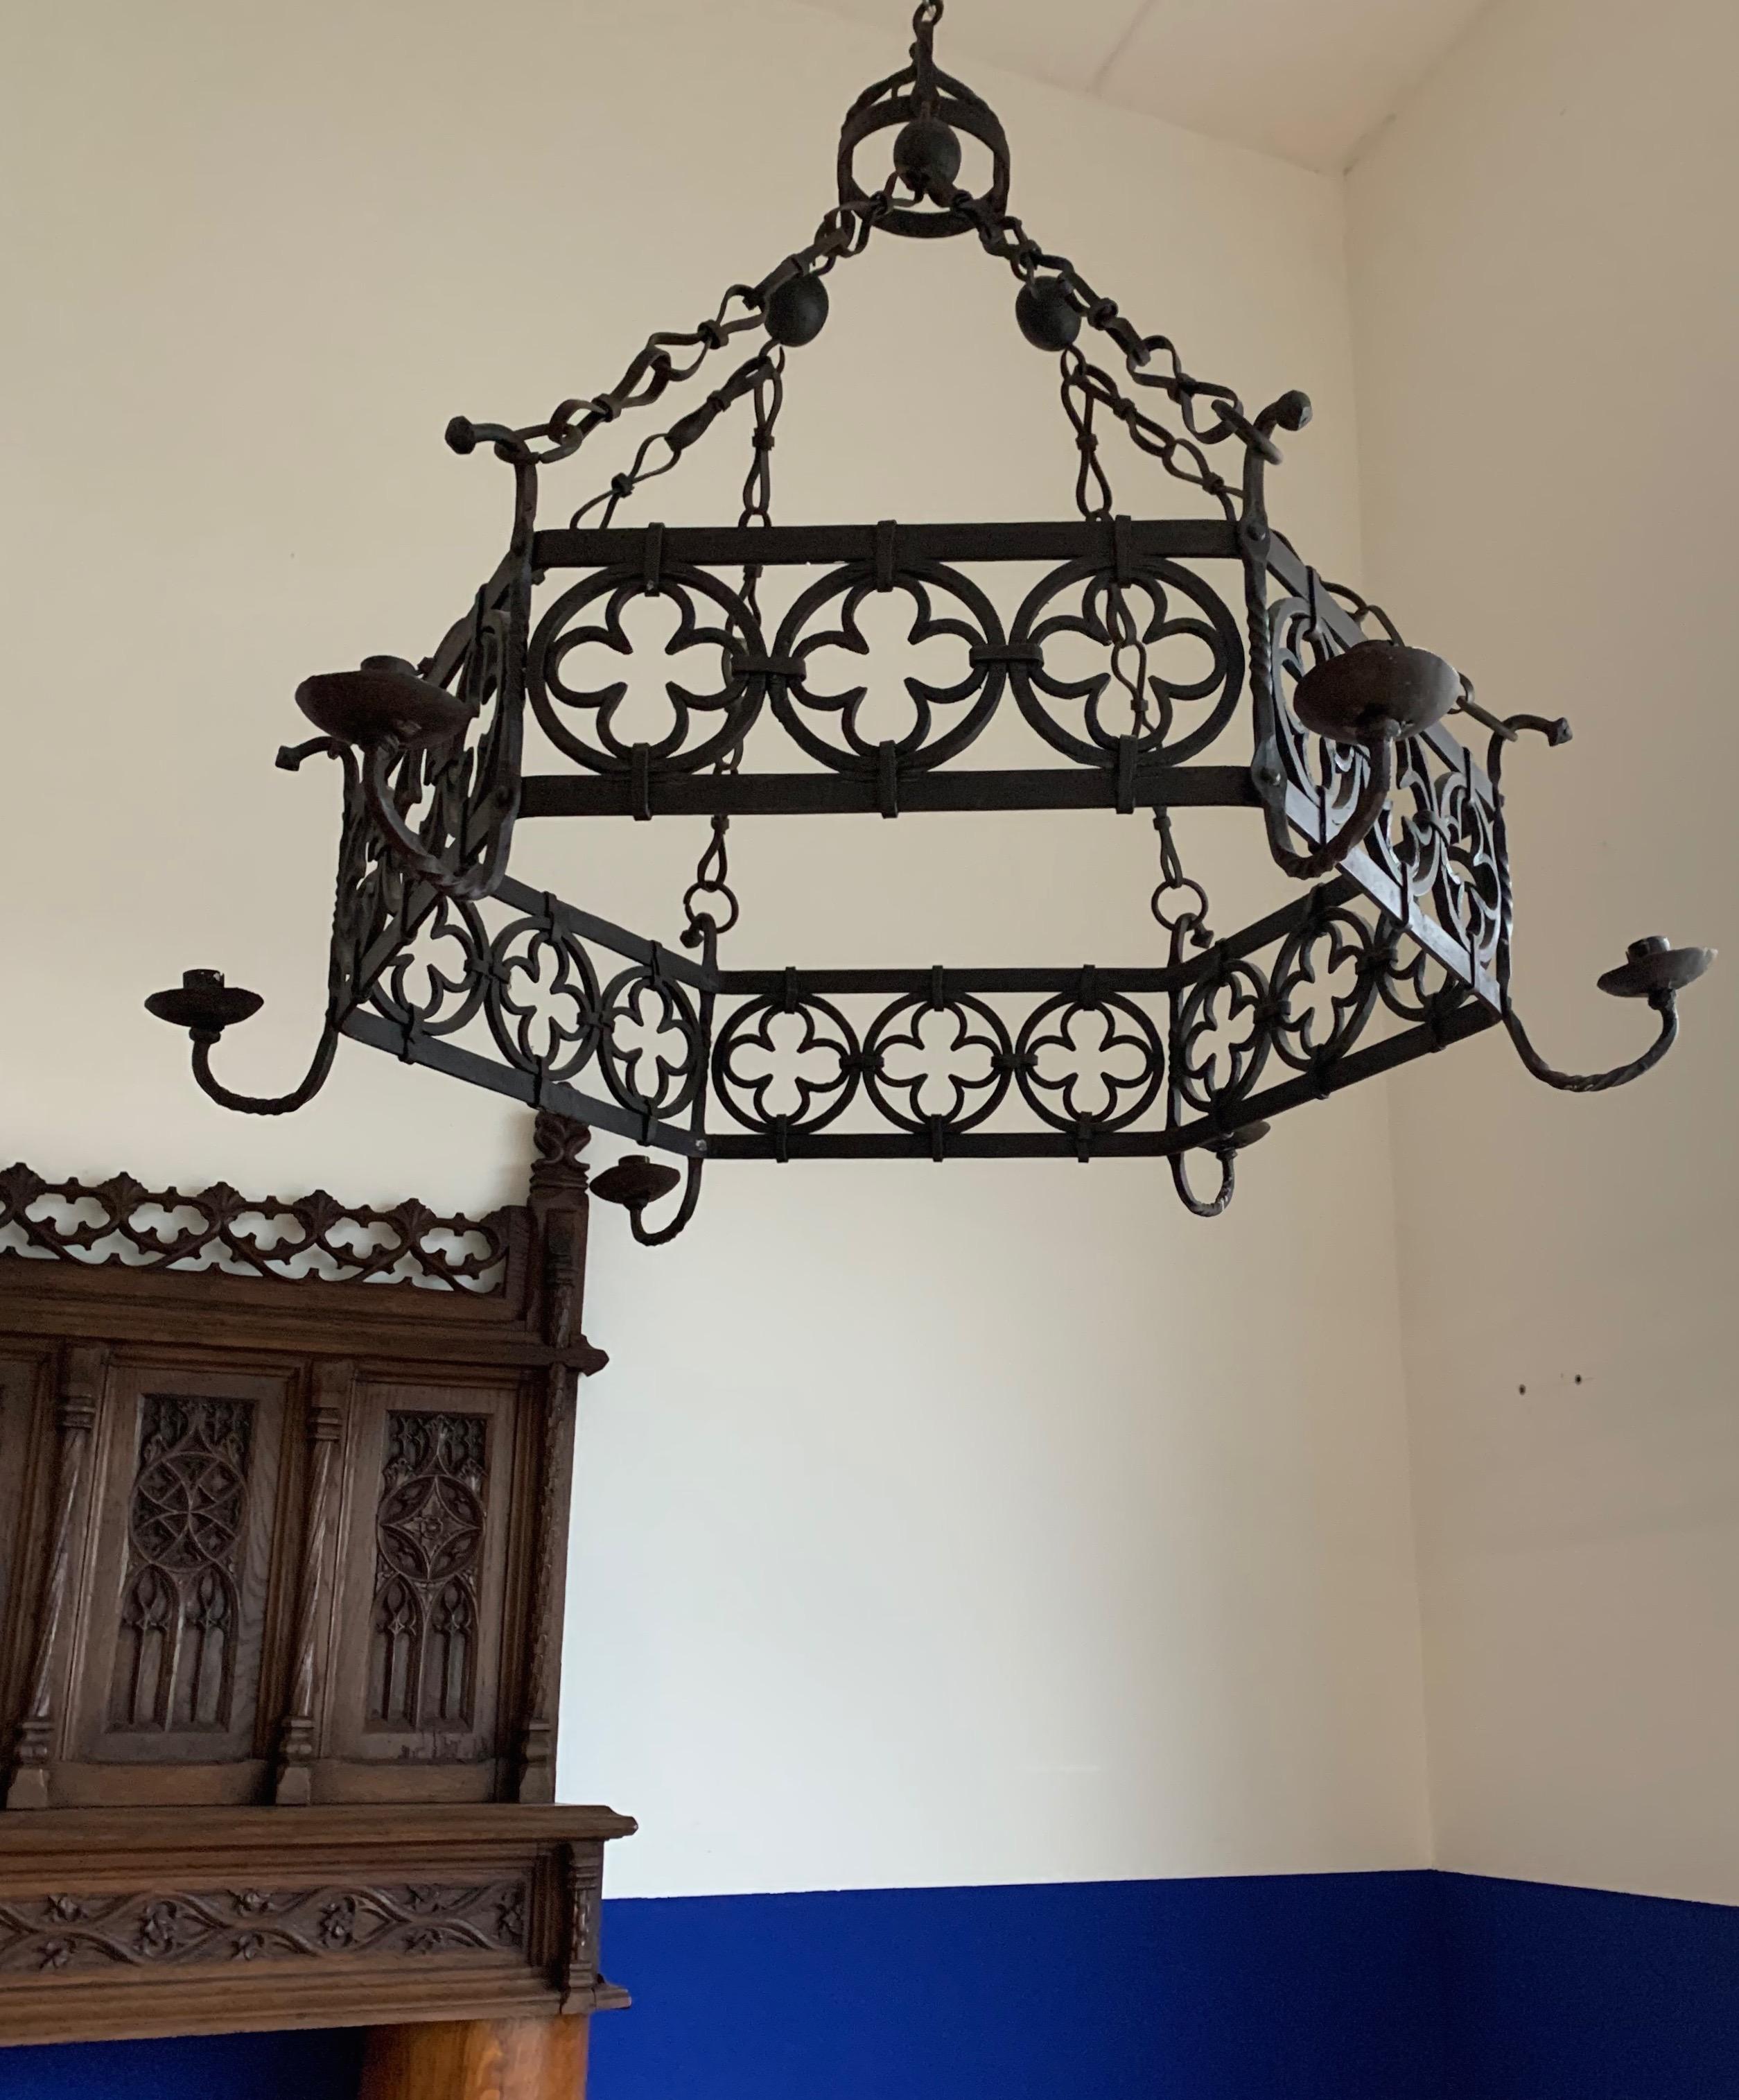 Dutch Large Gothic Revival Wrought Iron Chandelier for Dining Room / Restaurant Etc For Sale